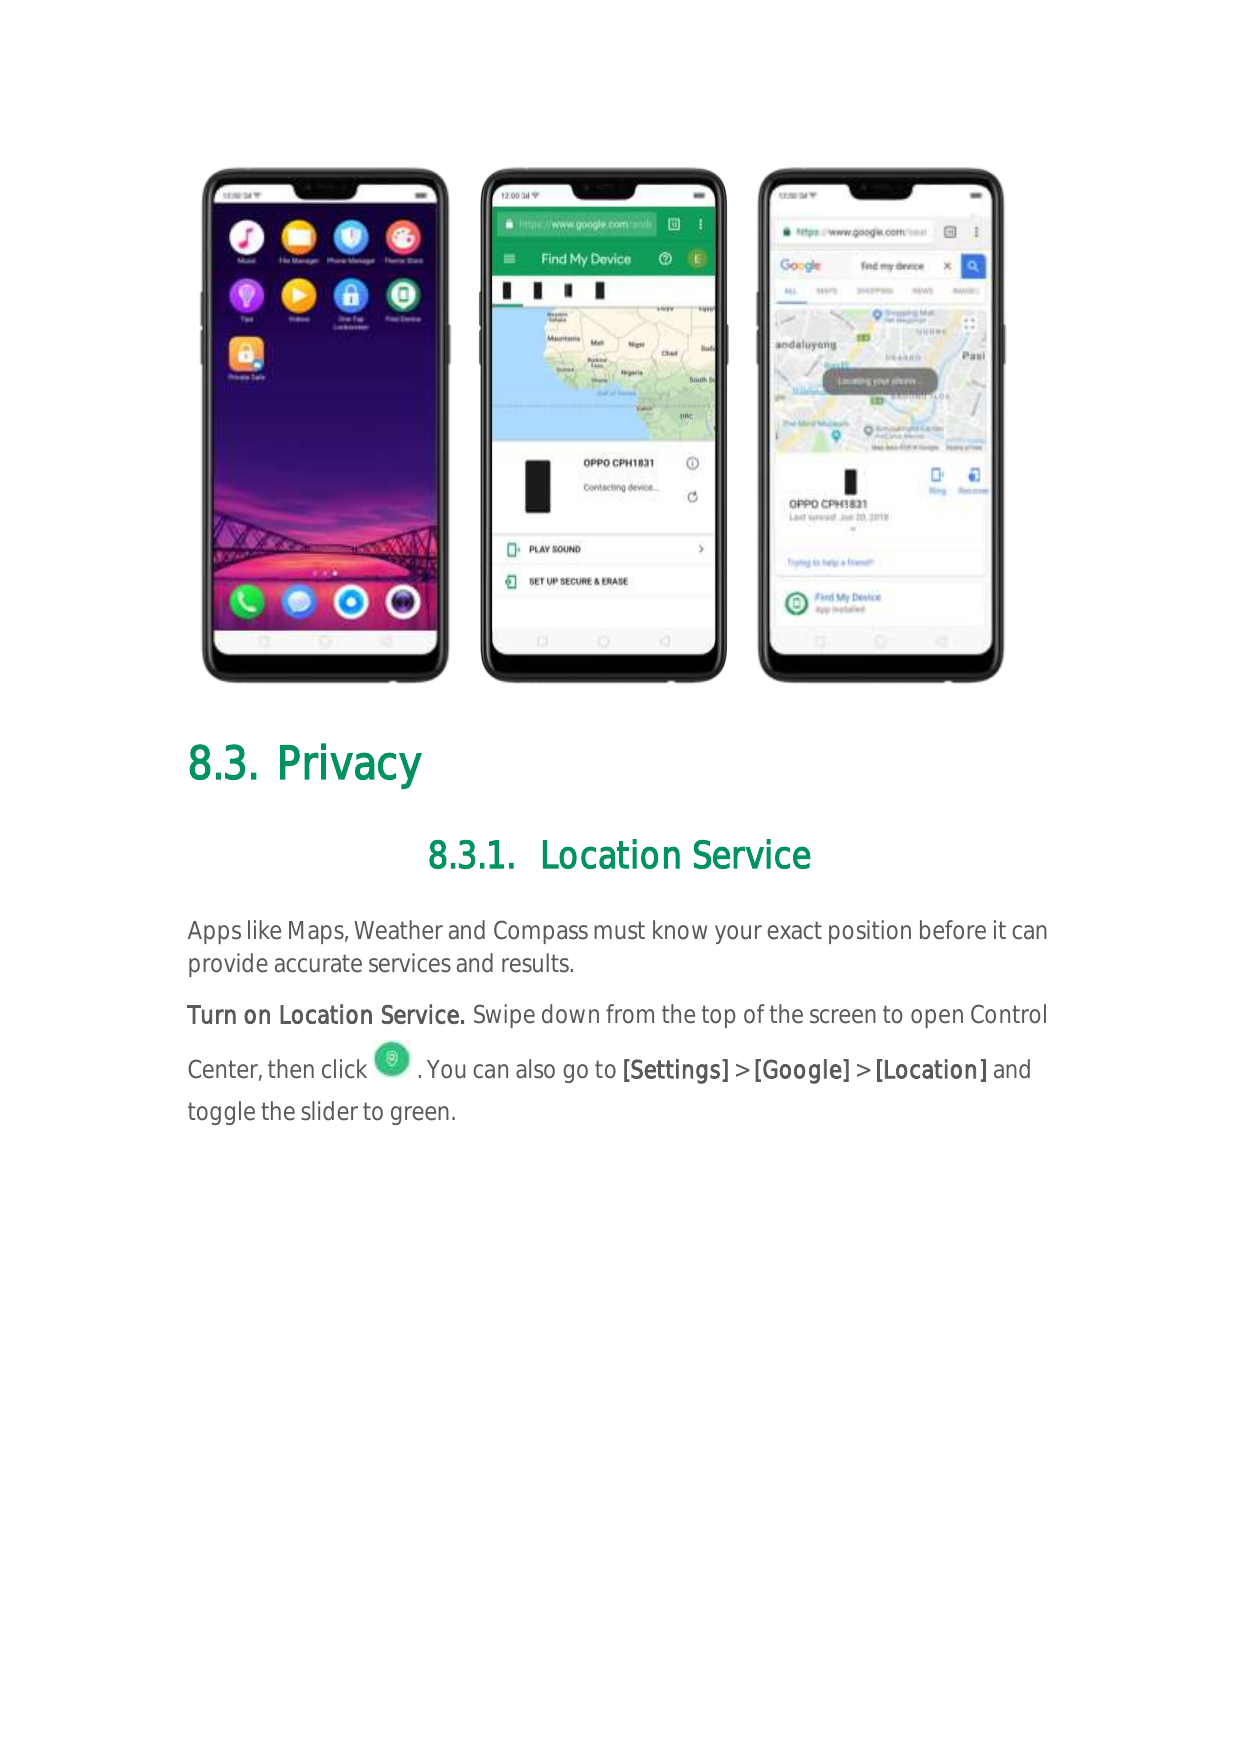 8.3. Privacy8.3.1. Location ServiceApps like Maps, Weather and Compass must know your exact position before it canprovide accura